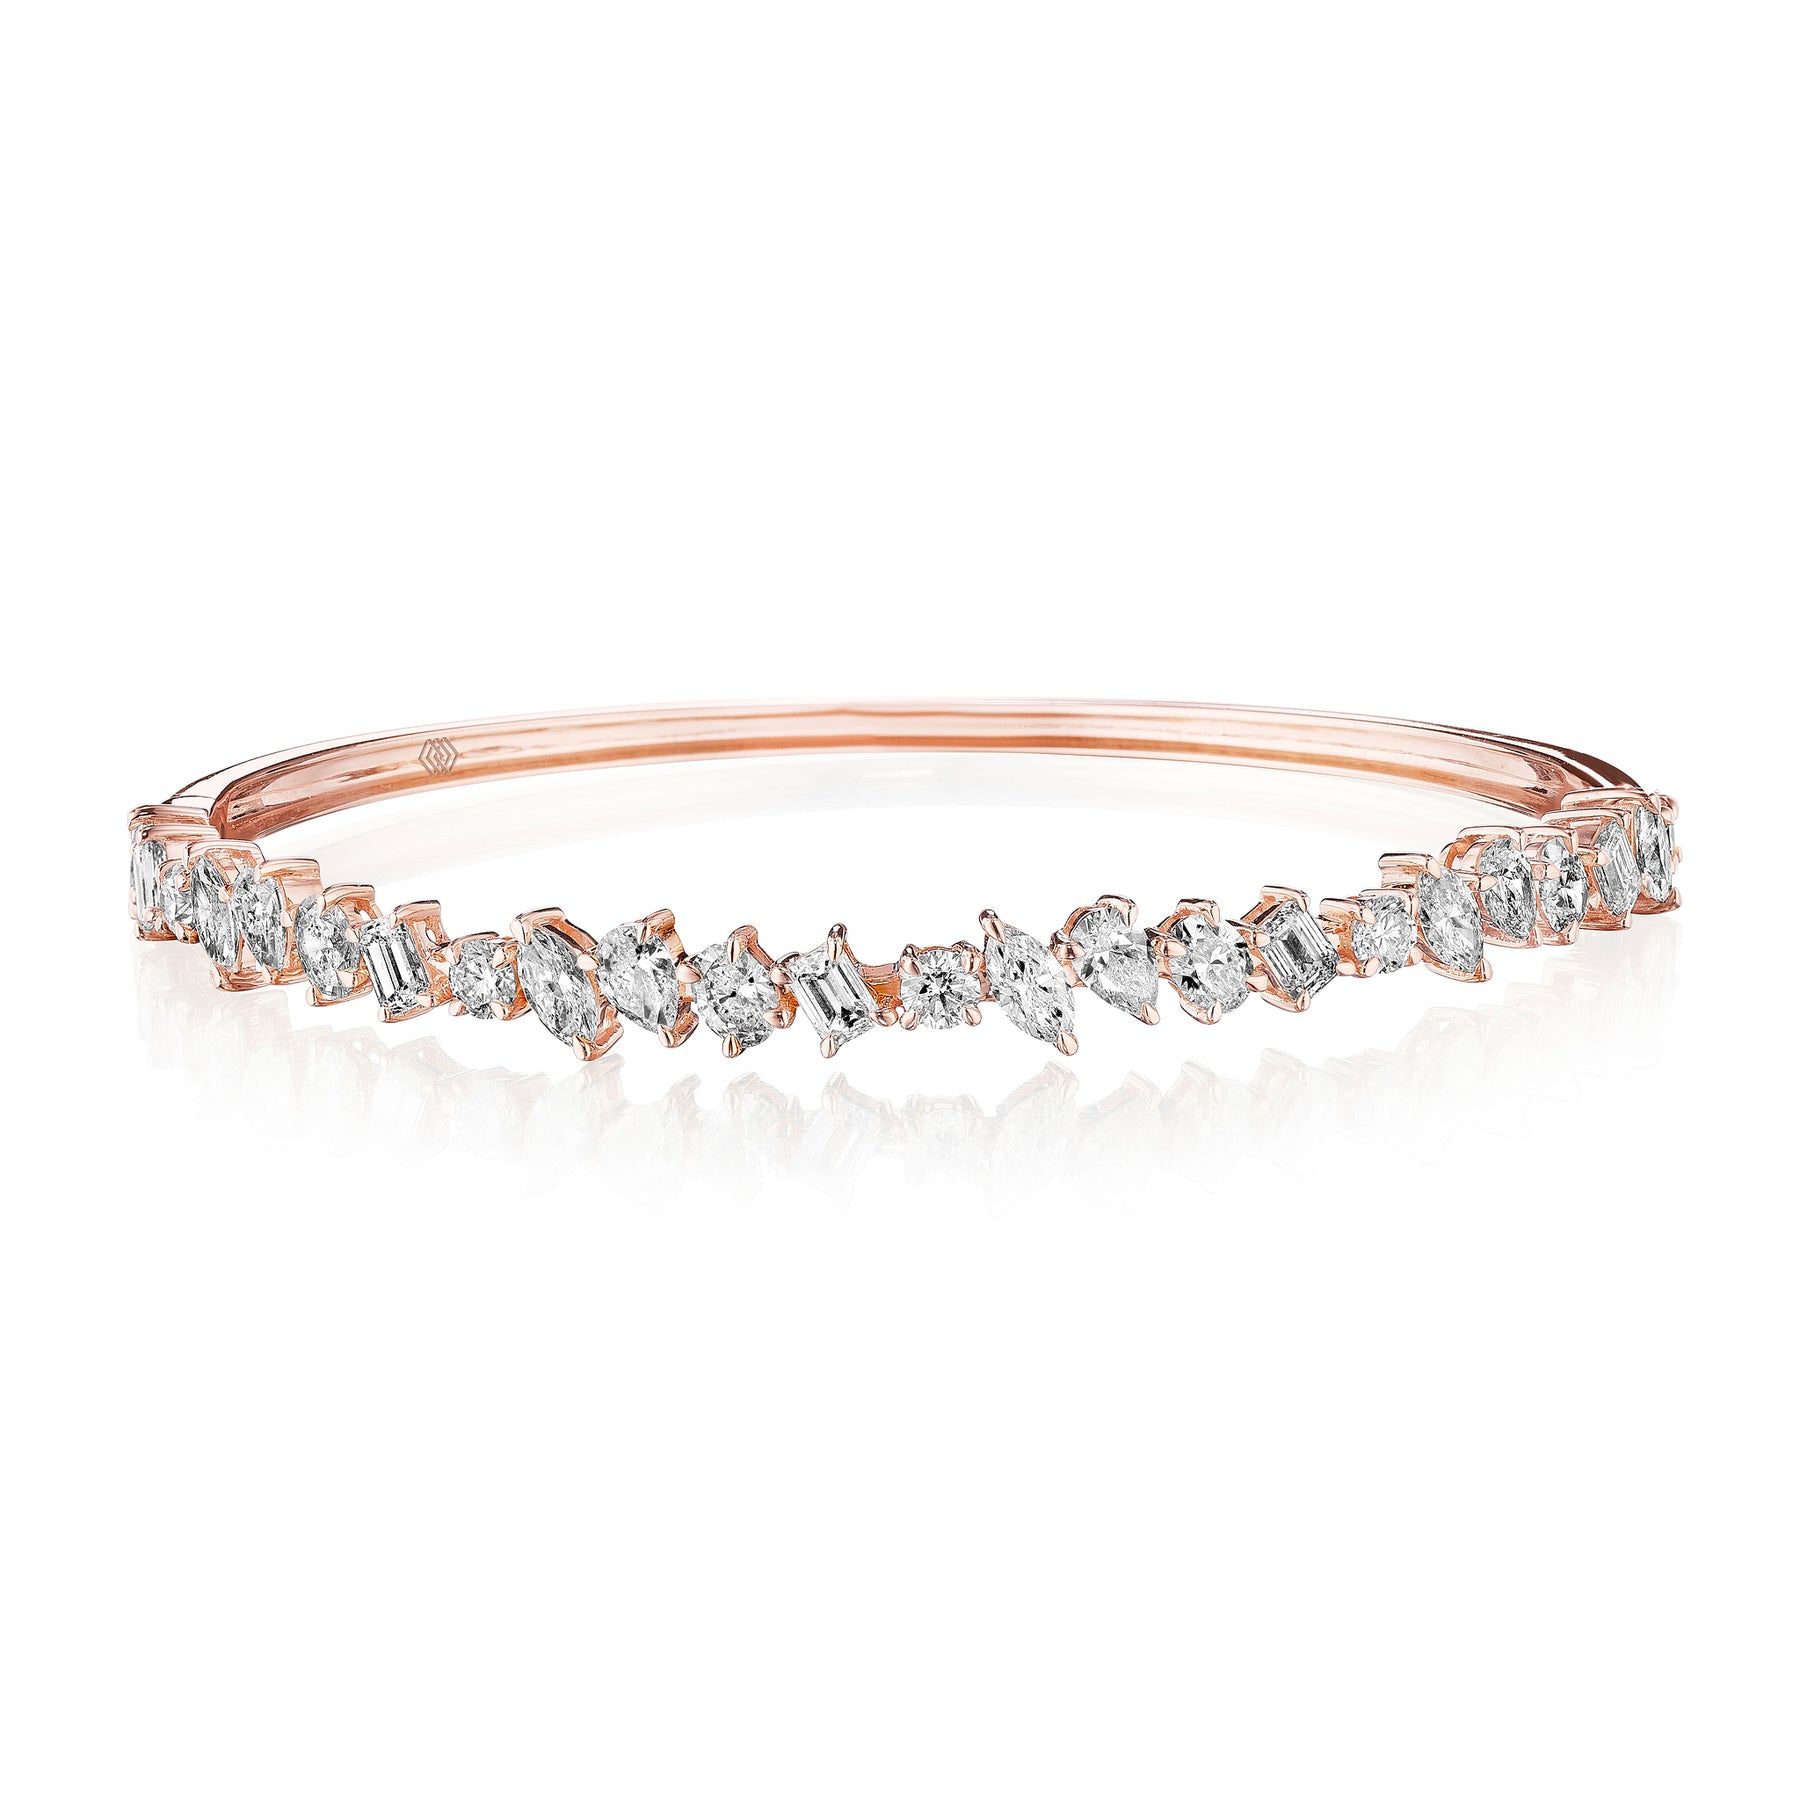 Marching Mixed Shape Diamond Bangle in Rose Gold